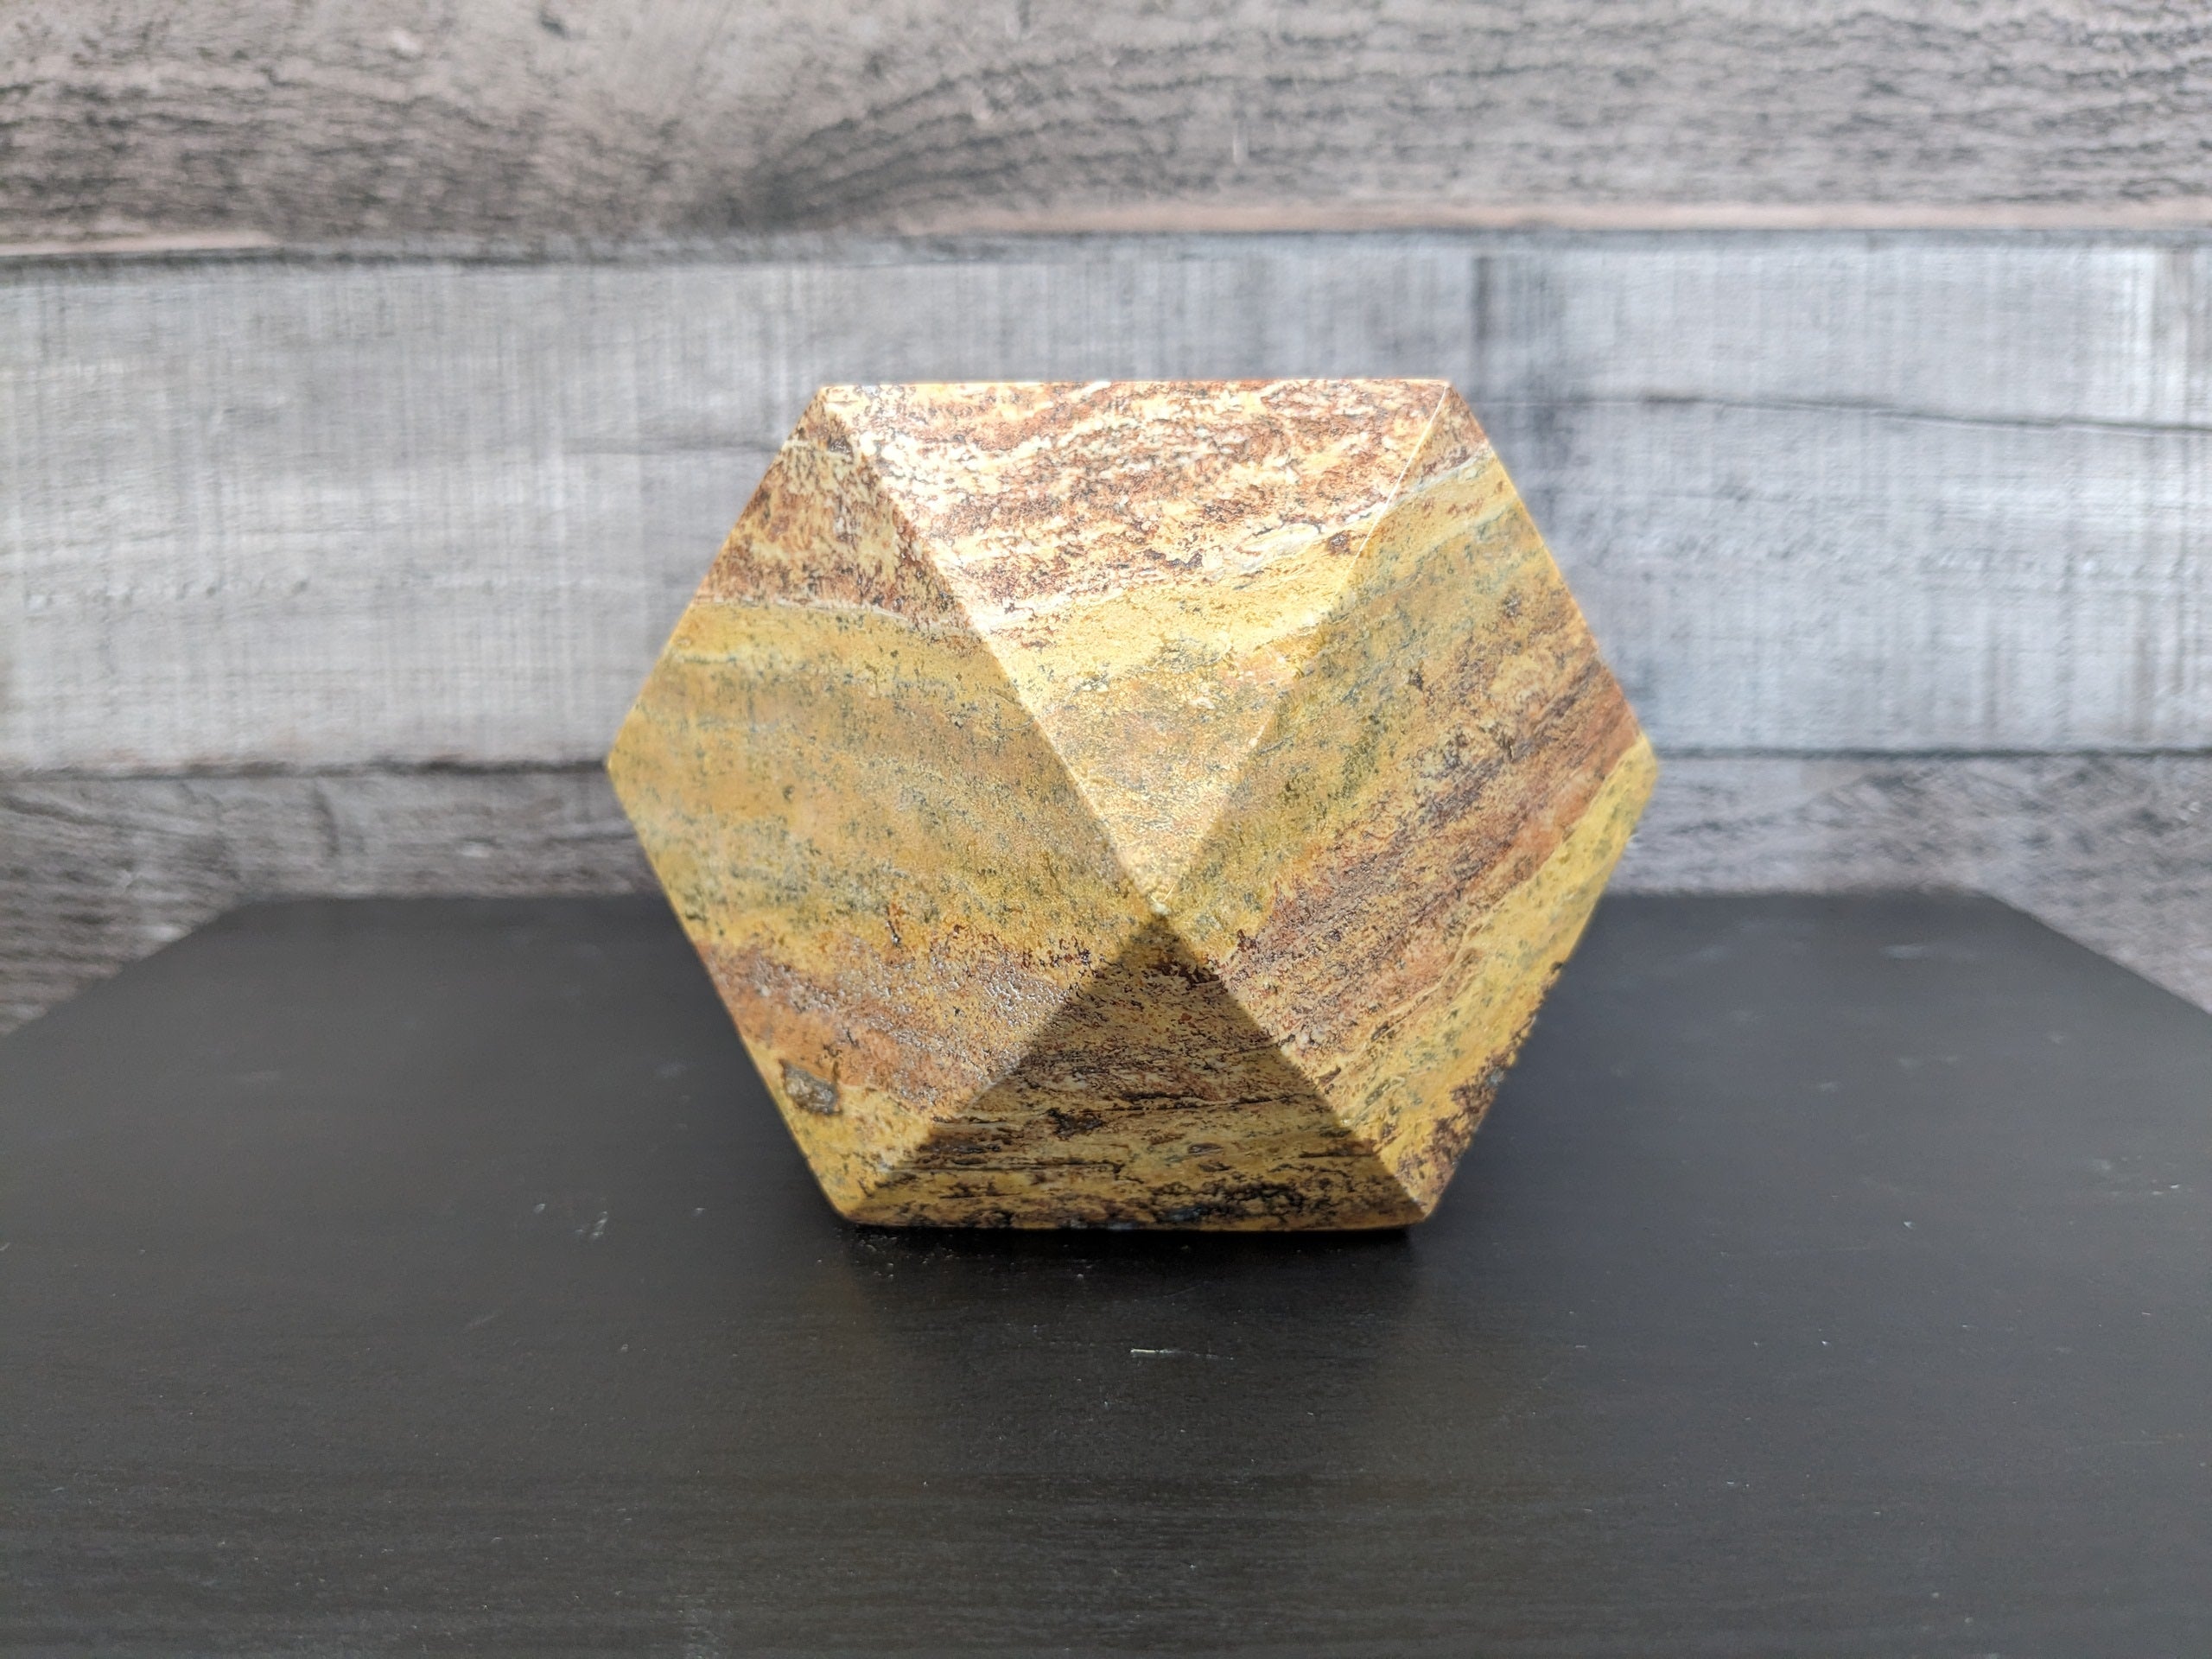 Red Orange Travertine Stone Geometric Mini Planter for Succulents and Terrariums. Handmade in Mexico. We ship and package from the USA. Buy now at www.felipeandgrace.com. 